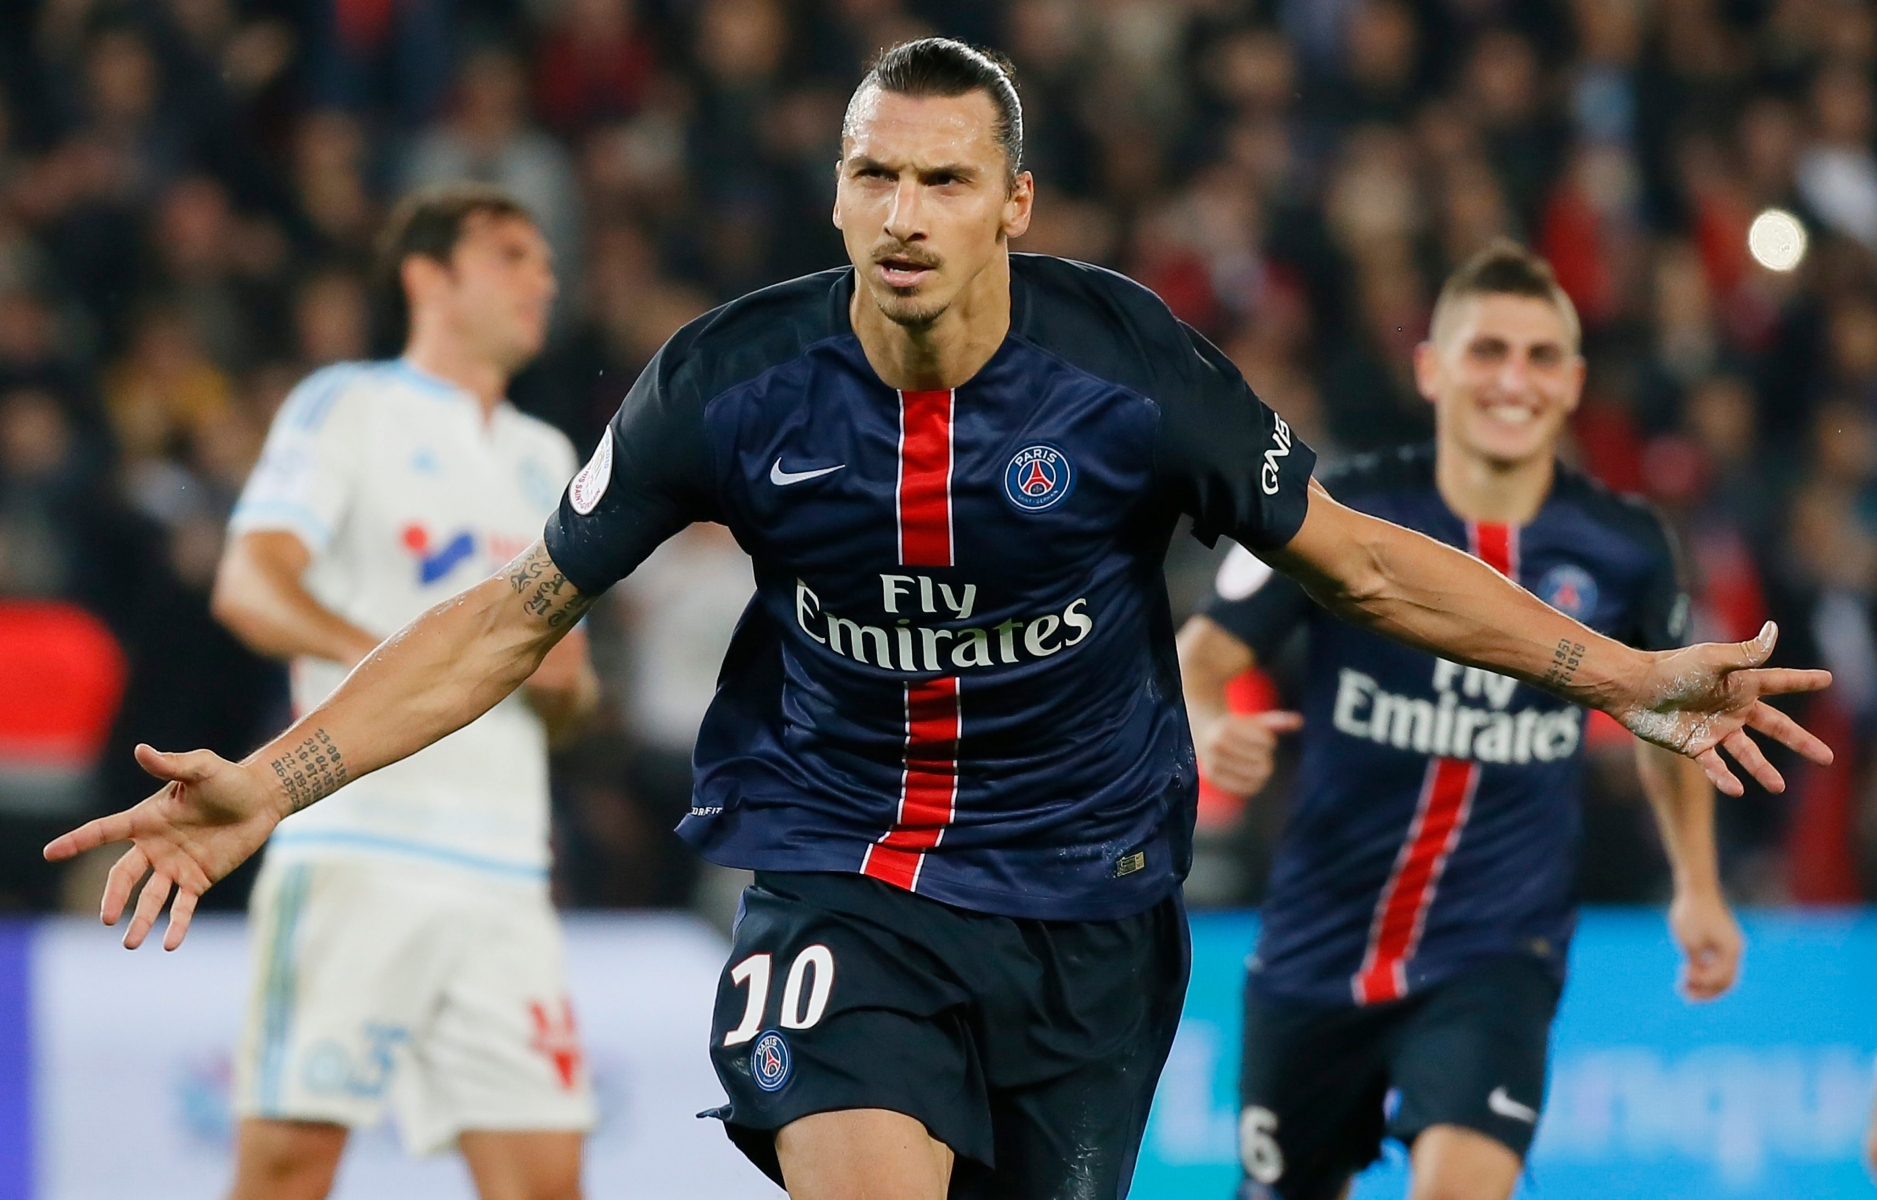 epa05303141 (FILE) A file picture dated 04 October 2015 shows Paris Saint Germain player Zlatan Ibrahimovic celebrates scoring a second penalty kick during the French soccer Ligue 1 match between Paris Saint Germain (PSG) and Olympique Marseille at the Parc des Princes stadium in Paris, France. Ibrahimovic announced via Twitter that he will leave Paris Saint-Germain at the end of this season.  EPA/IAN LANGSDON *** Local Caption *** 52291768 FILE FRANCE IBRAHIMOVIC